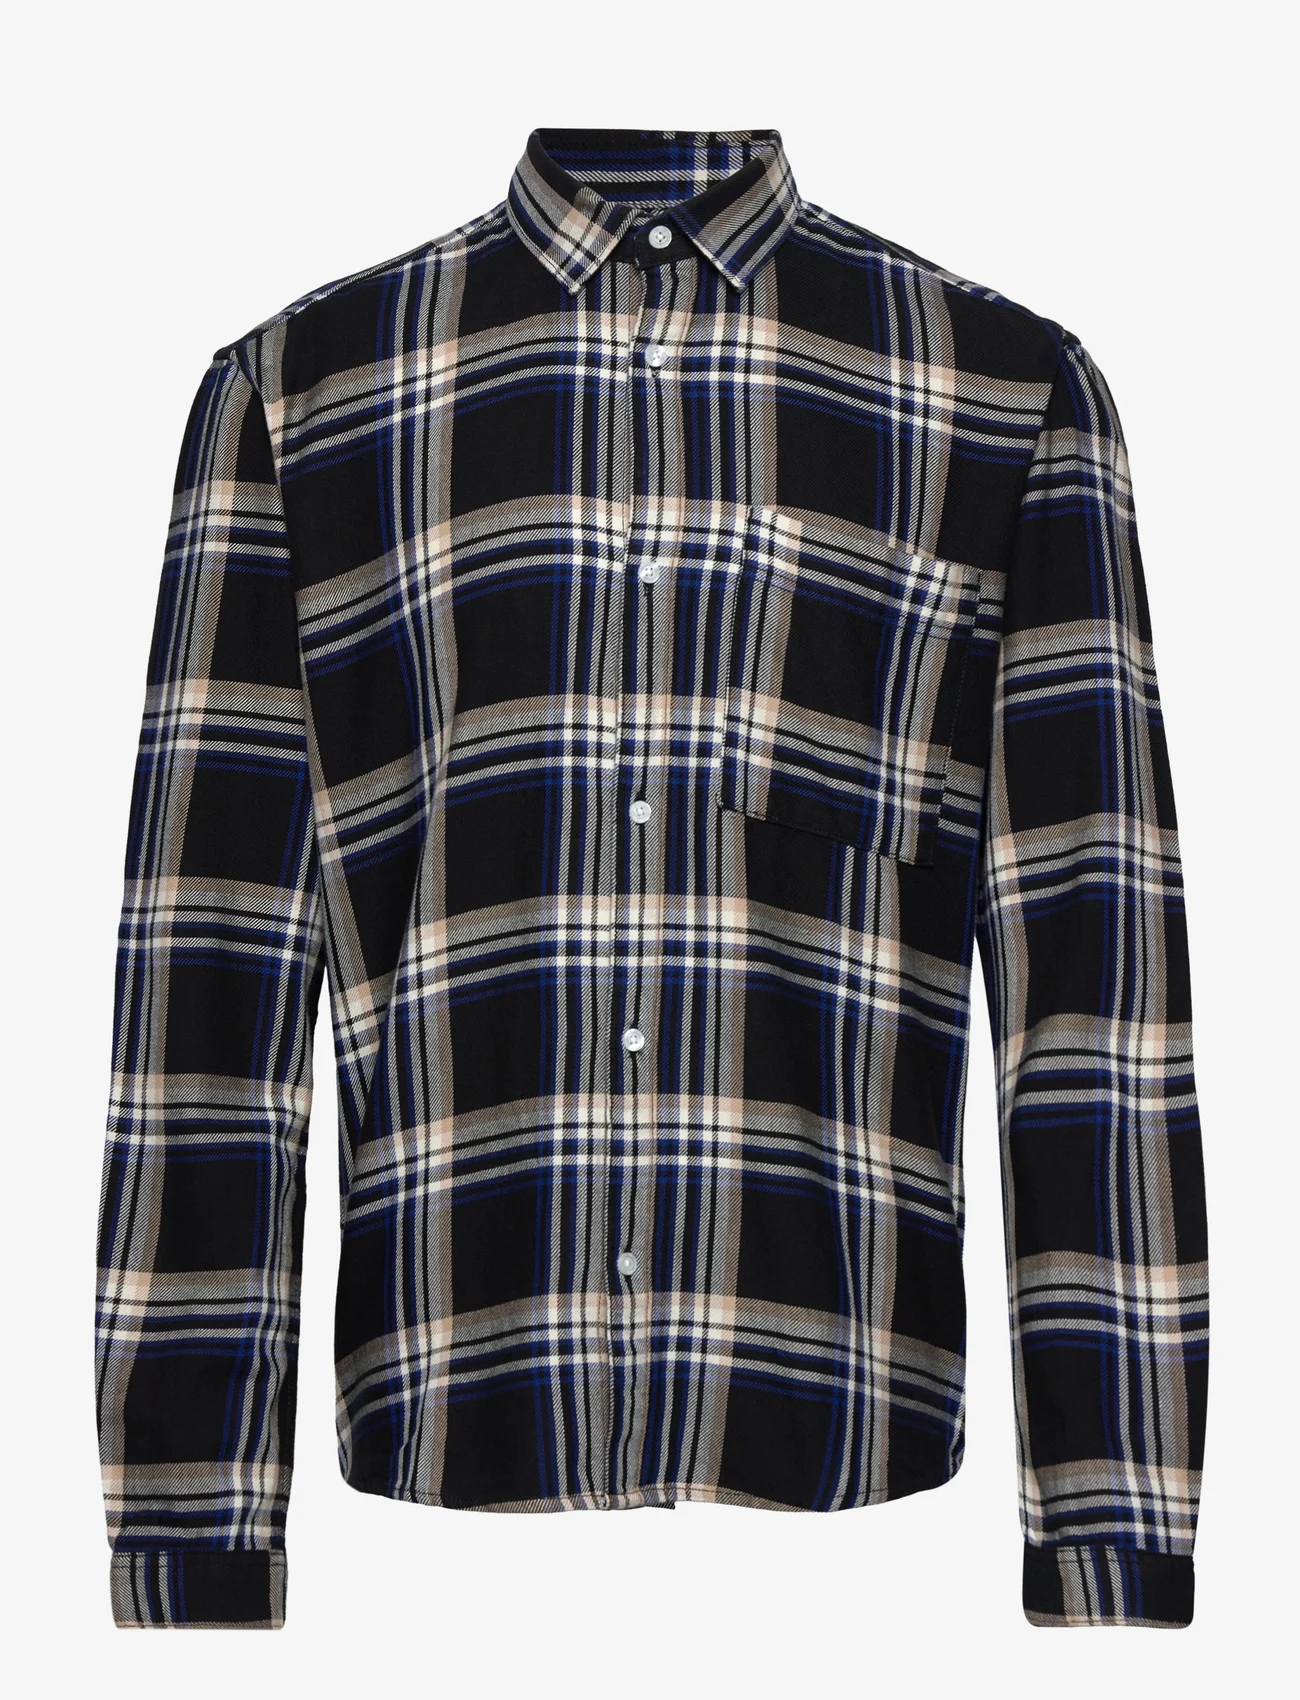 Tom Tailor - relaxed chec - casual skjortor - black blue check - 0